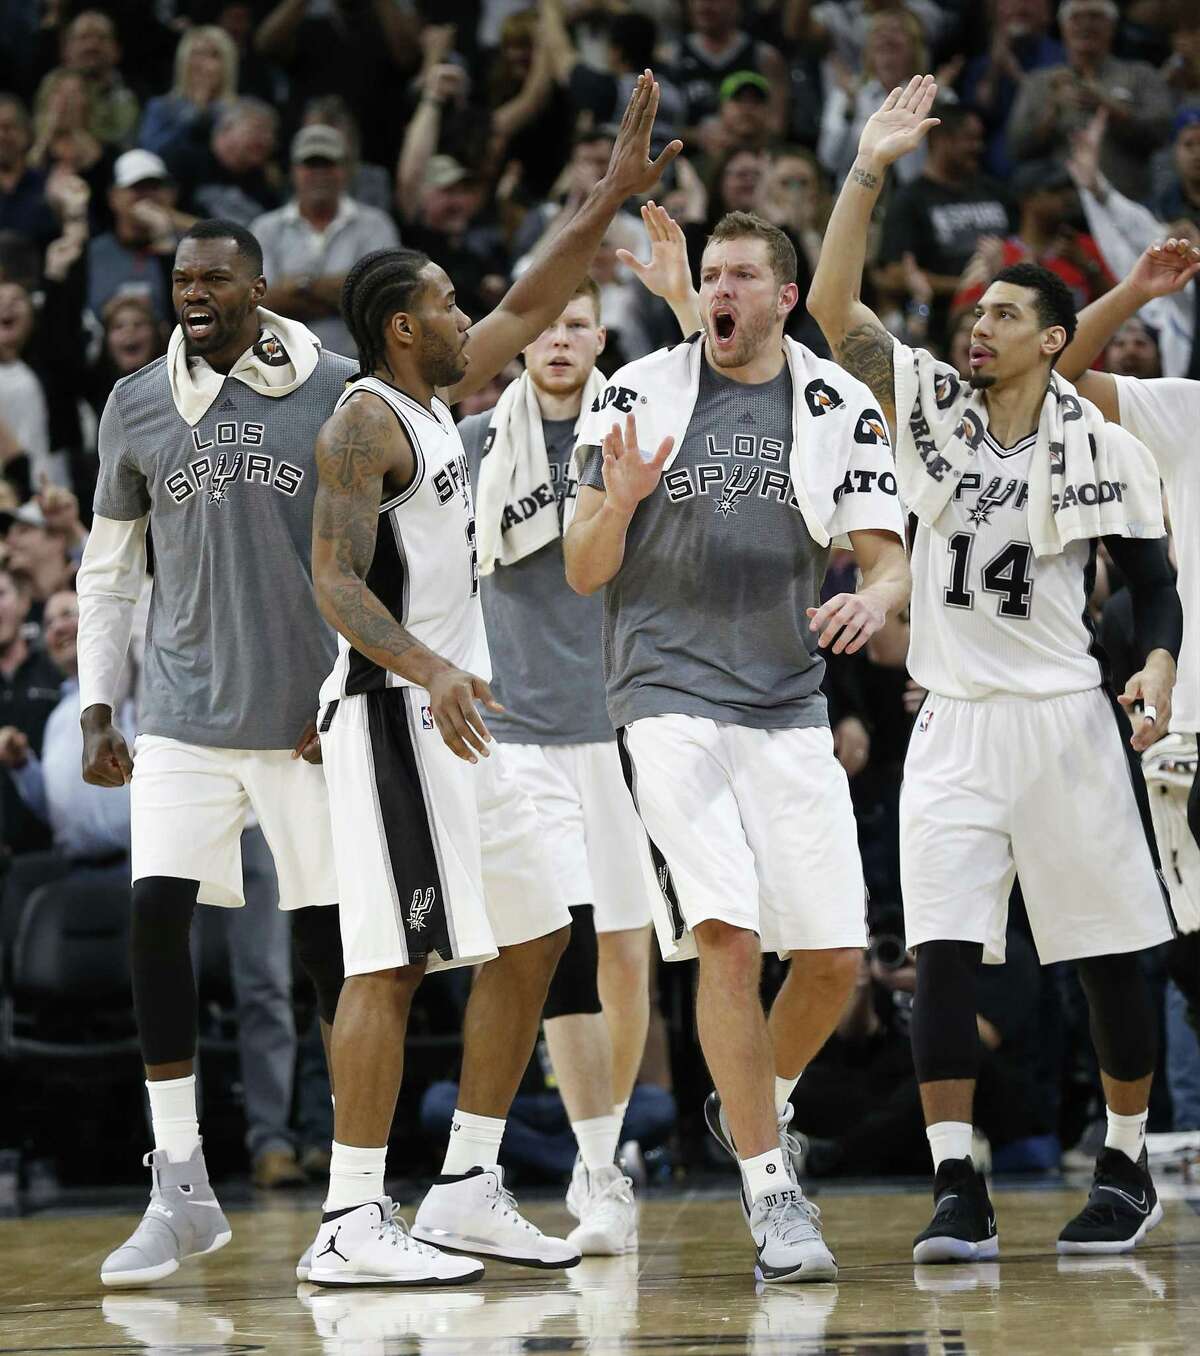 Spurs?’ Kawhi Leonard (02) gets congratulated by the team bench after hitting the winning shot against the Indiana Pacers at the AT&T Center on Wednesday, Mar. 1, 2017. Spurs defeated the Pacers, 100-99. (Kin Man Hui/San Antonio Express-News)